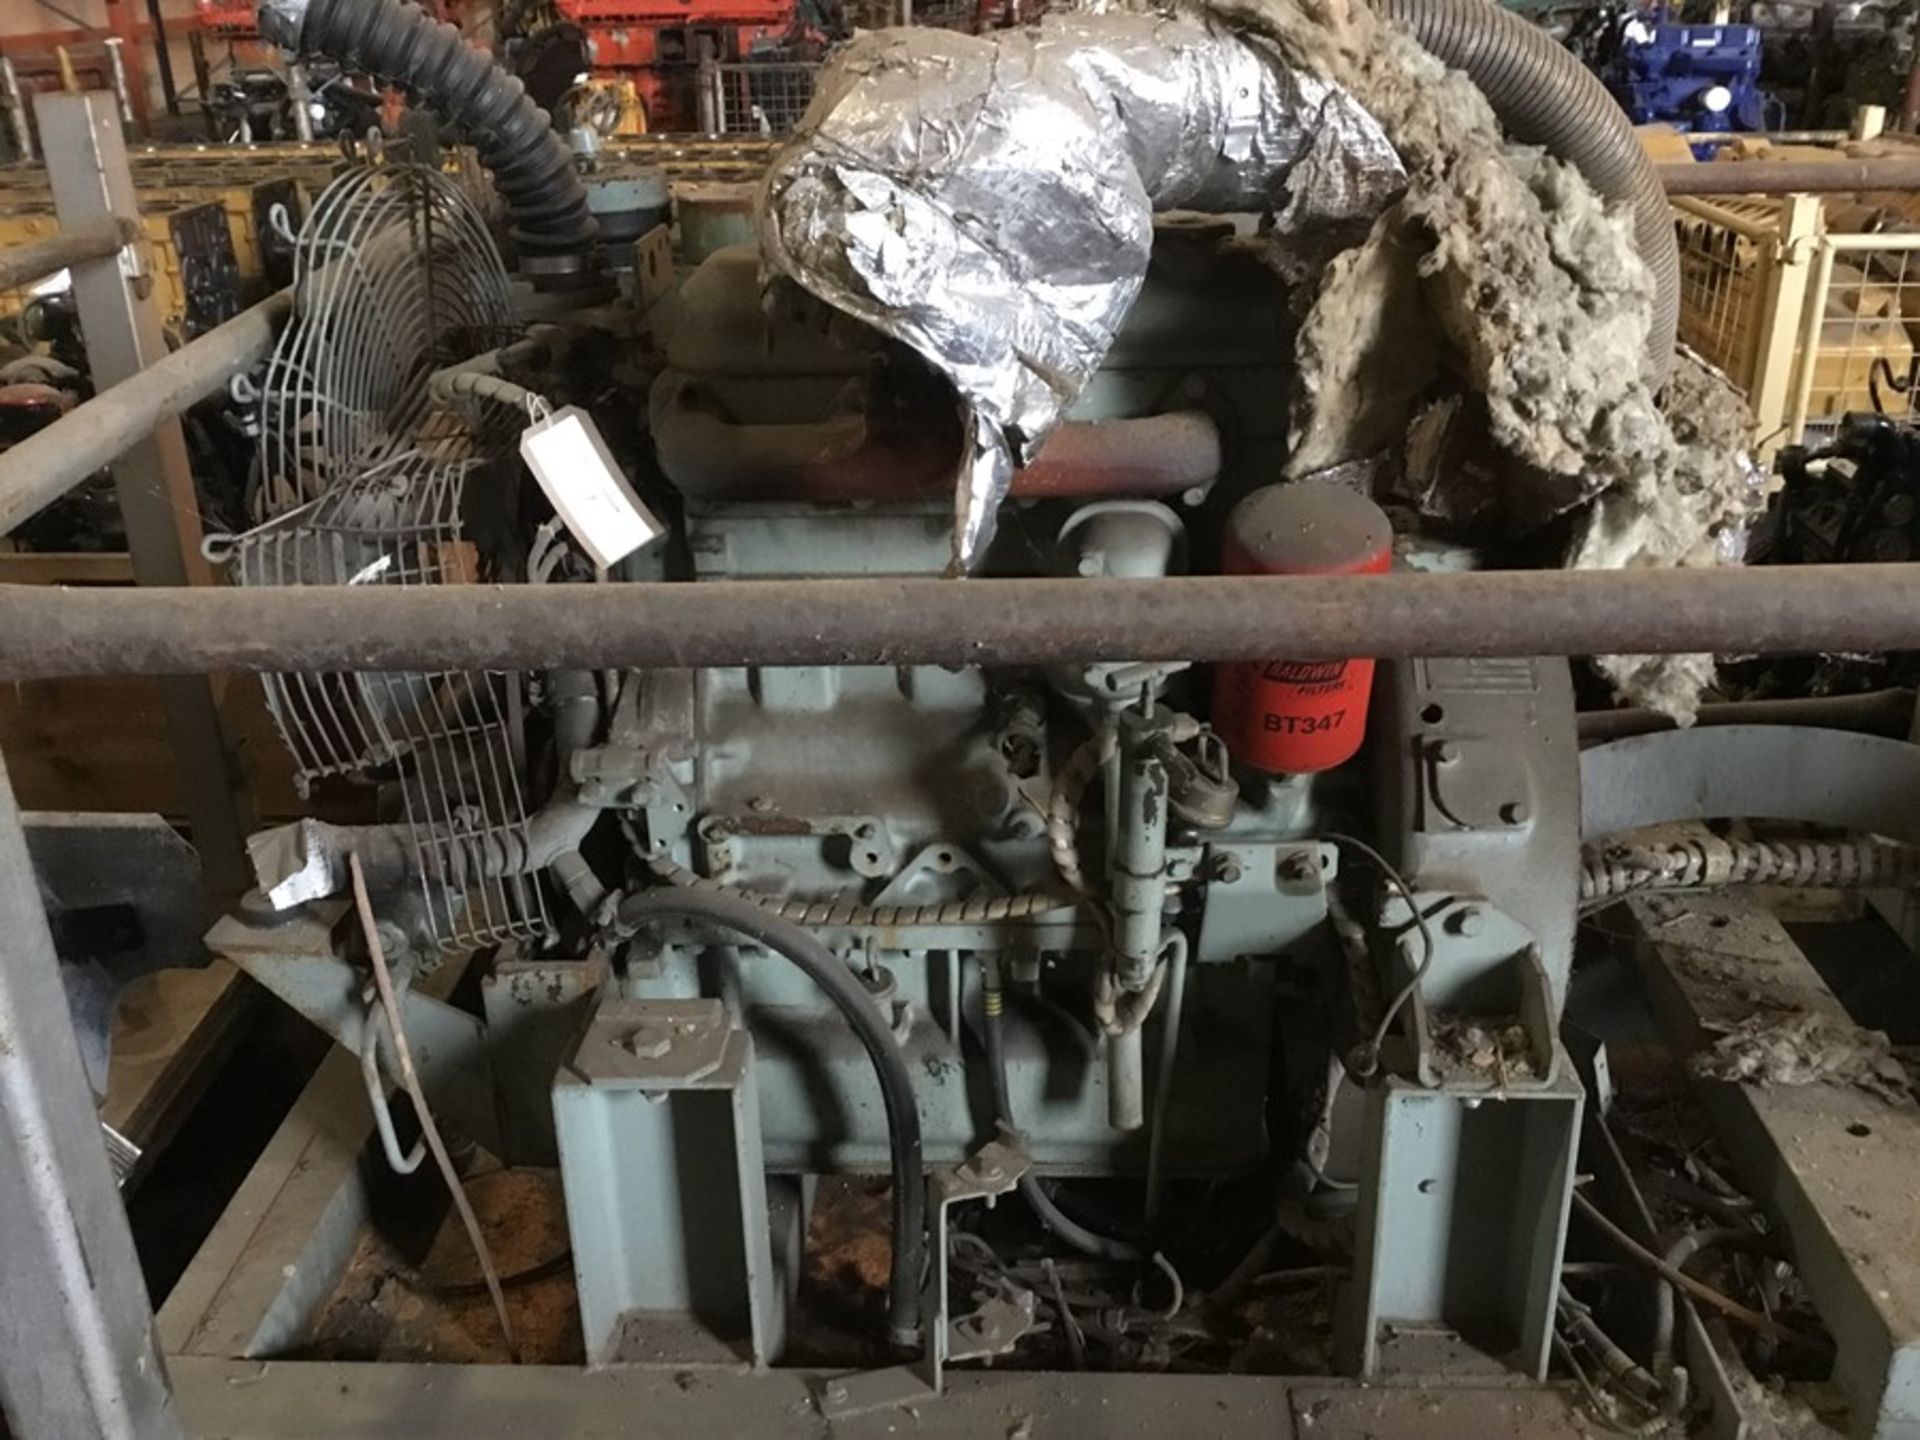 Iveco 8041 Diesel engine: Iveco 8041.04 4cyl non Turbo, Serial 8041.0*306-747516 Incomplete - Image 12 of 15